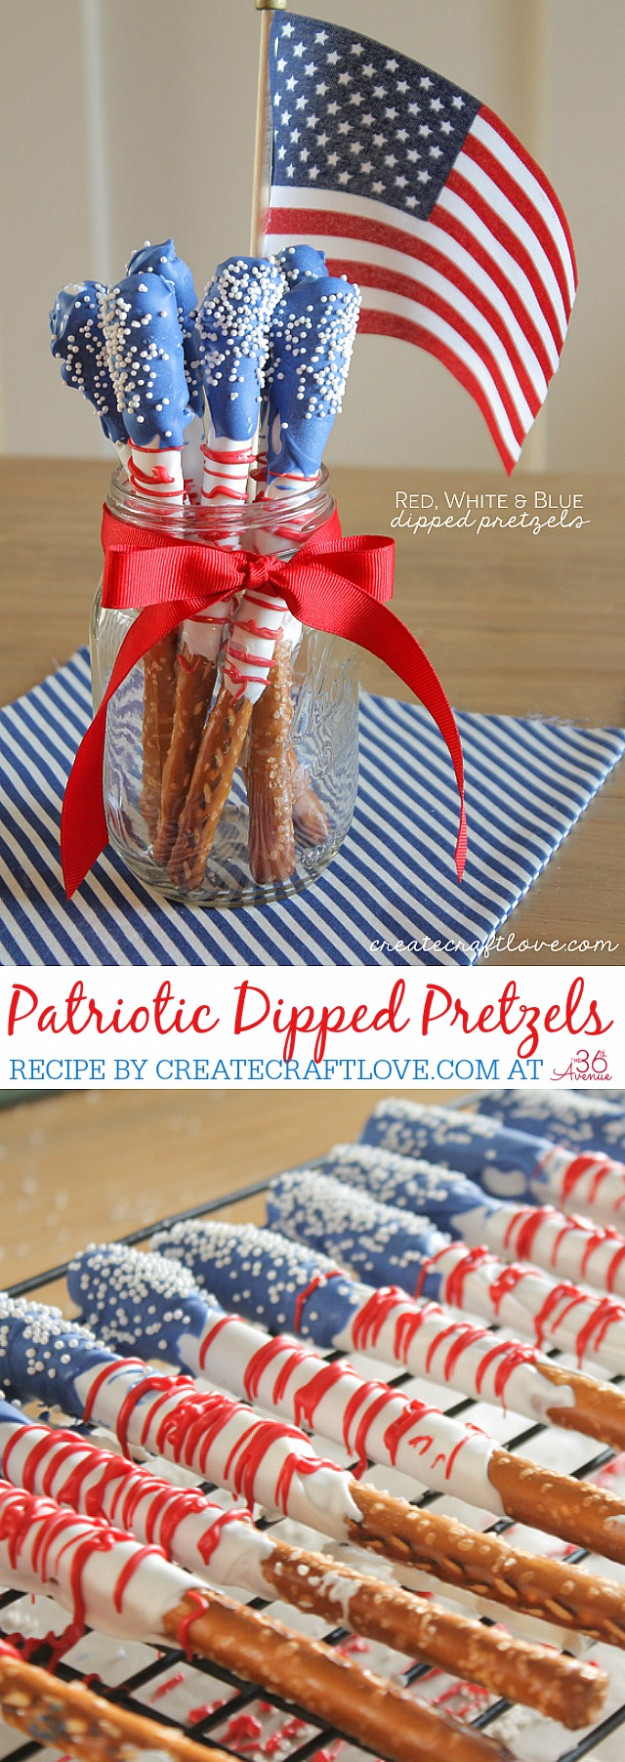 4th Of July Party Supplies
 35 Awesome 4th of July Party Ideas